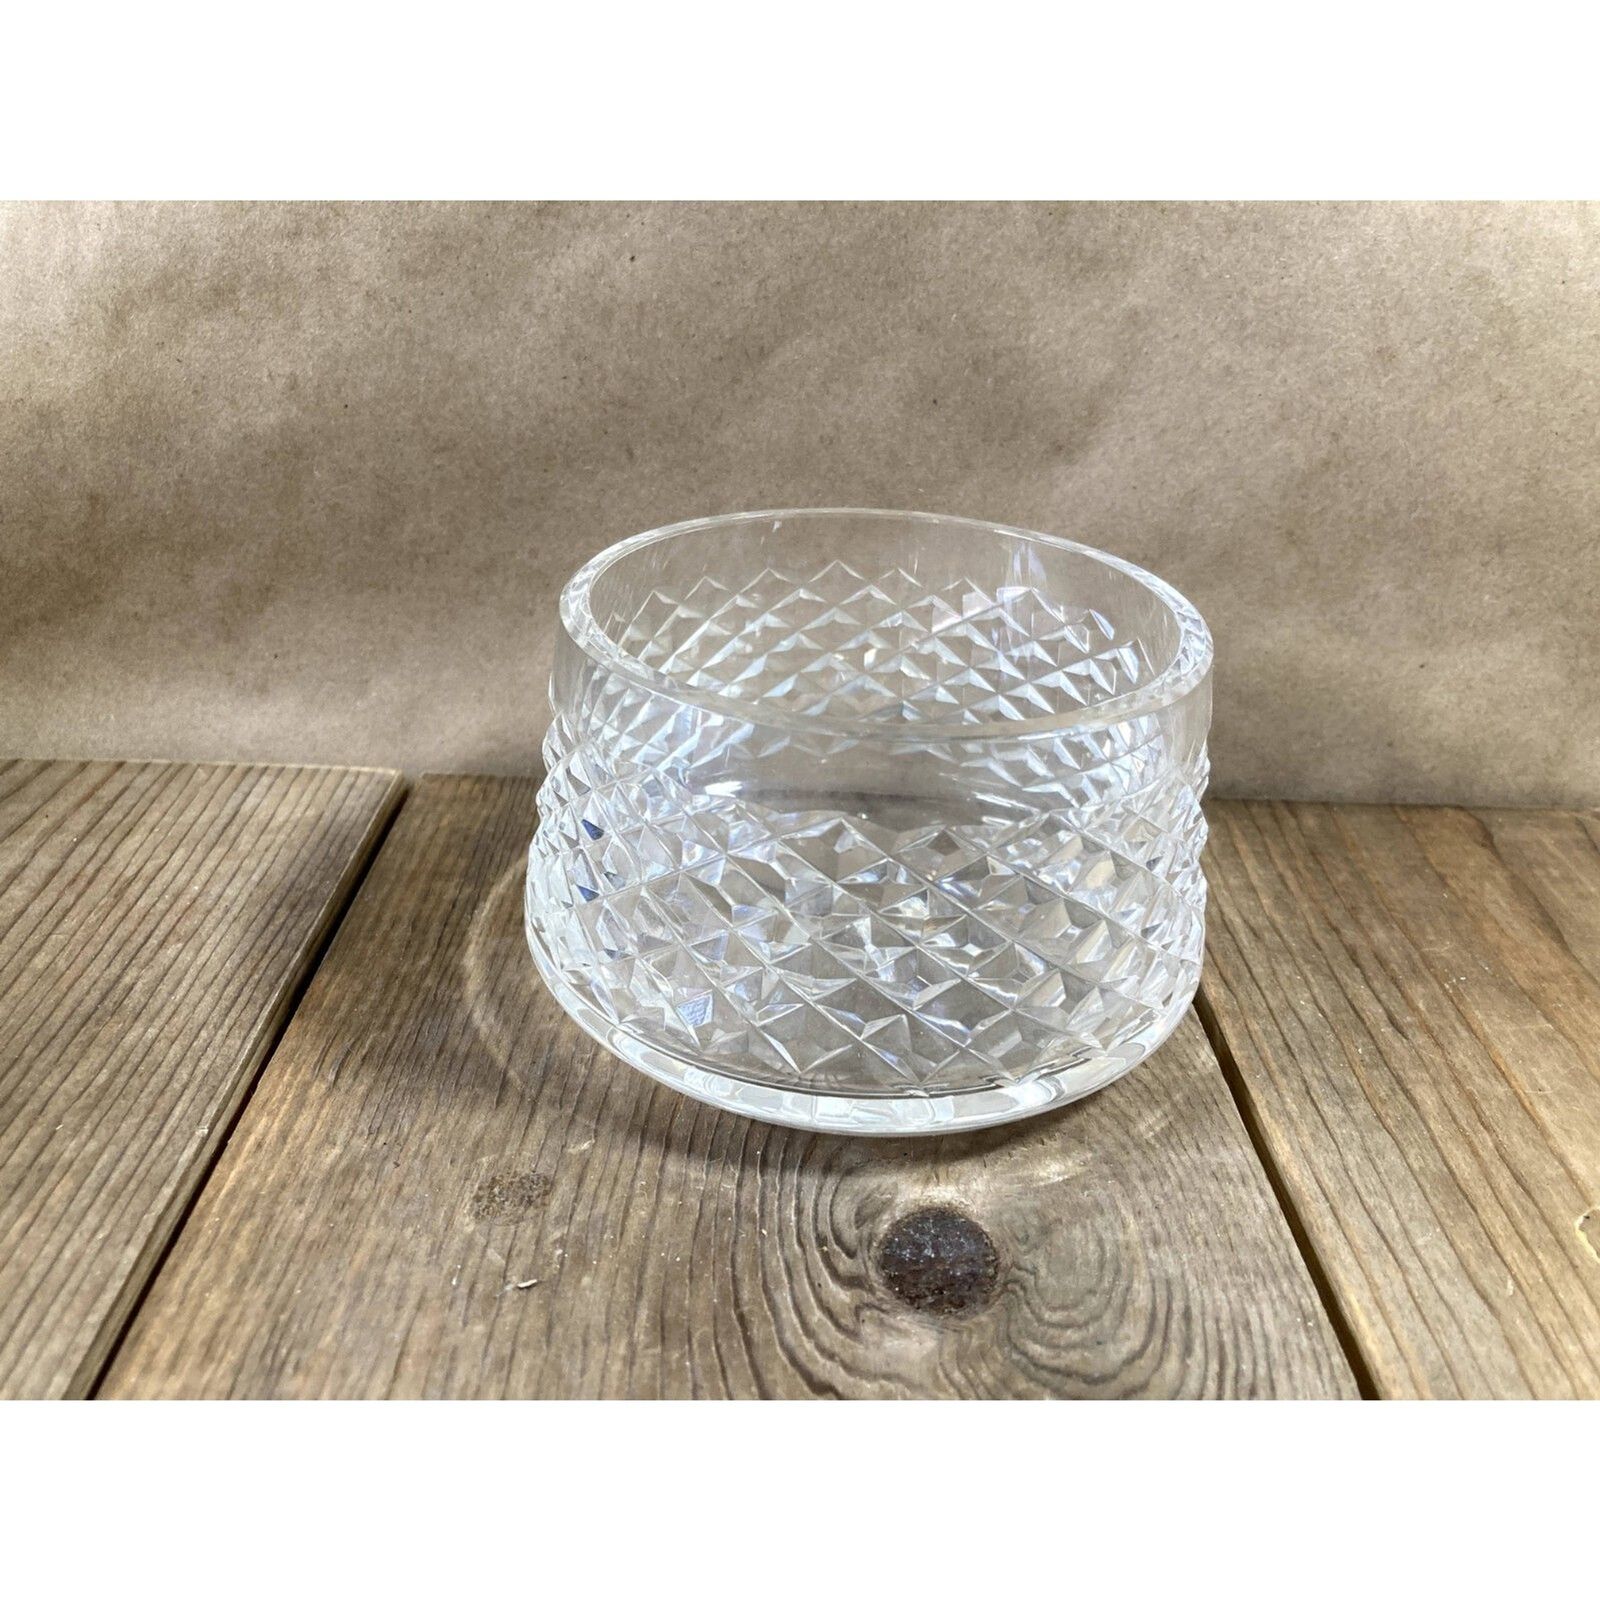 Vintage Crystal Bowl with beautiful etched carvings 